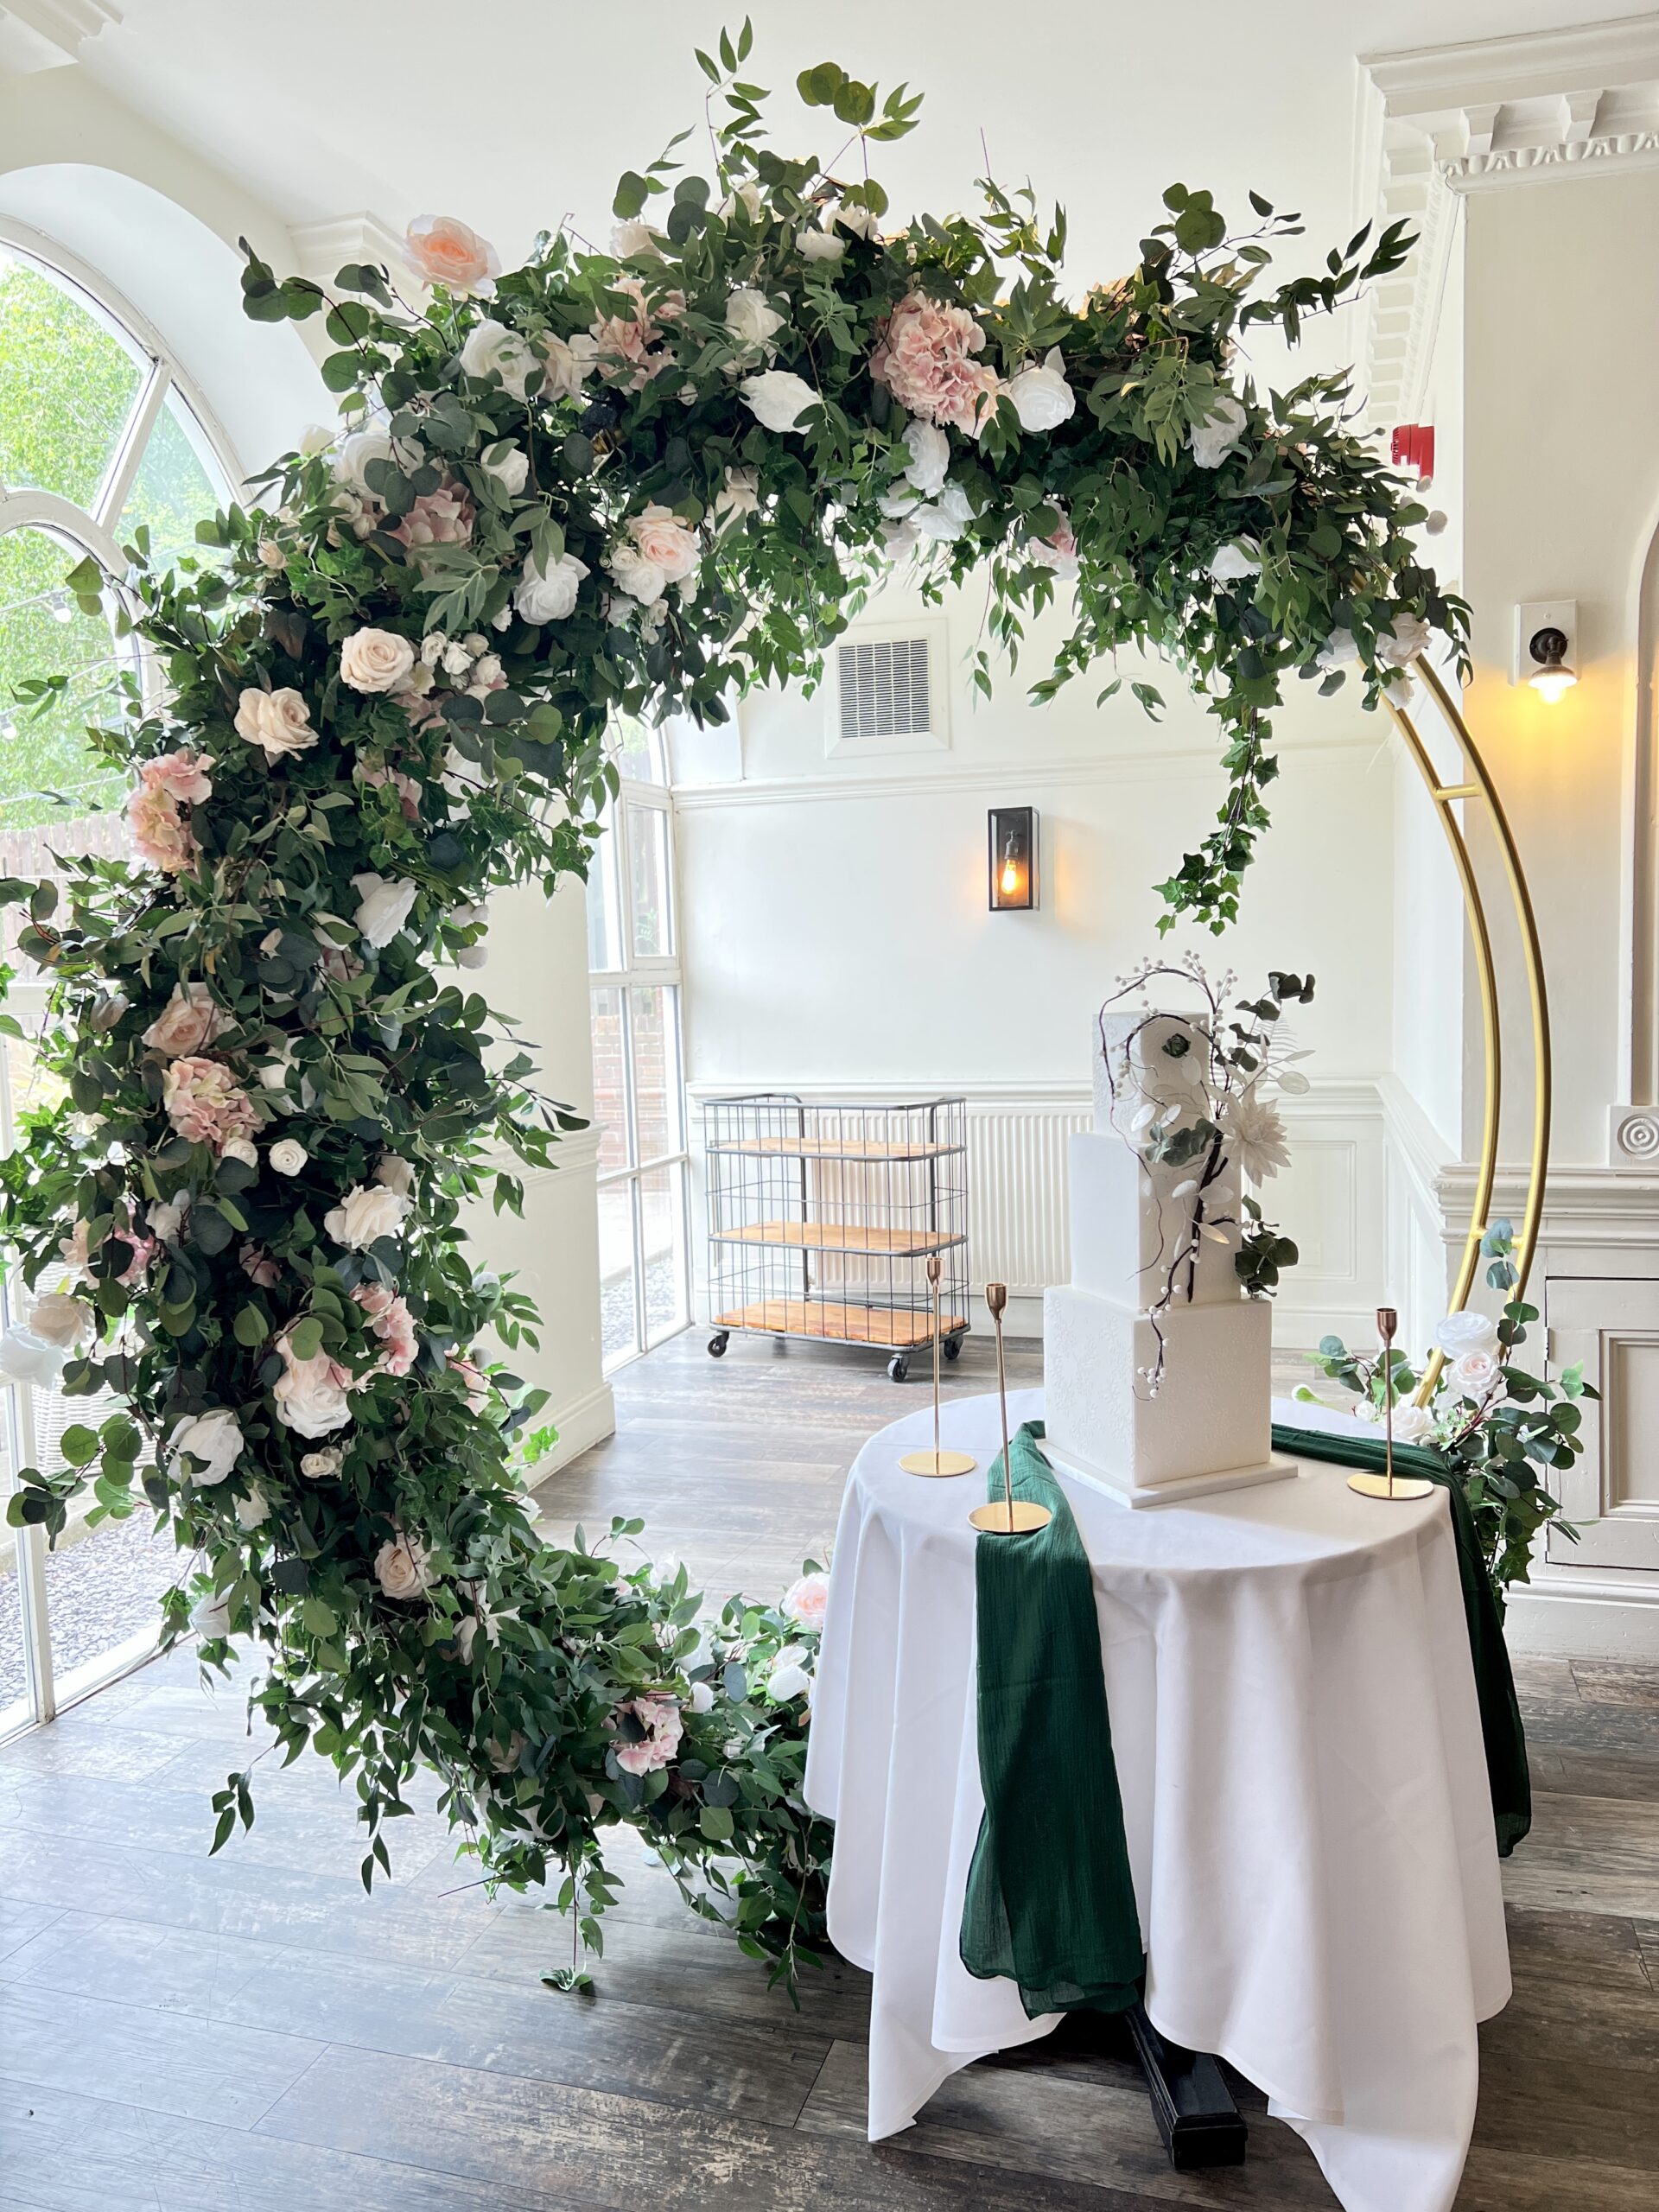 floral arch, flower arch, wedding arch hire, wedding ideas, wedding decorations, wedding decor hire, wedding decoration ideas, ceremony hire, flower wall hire